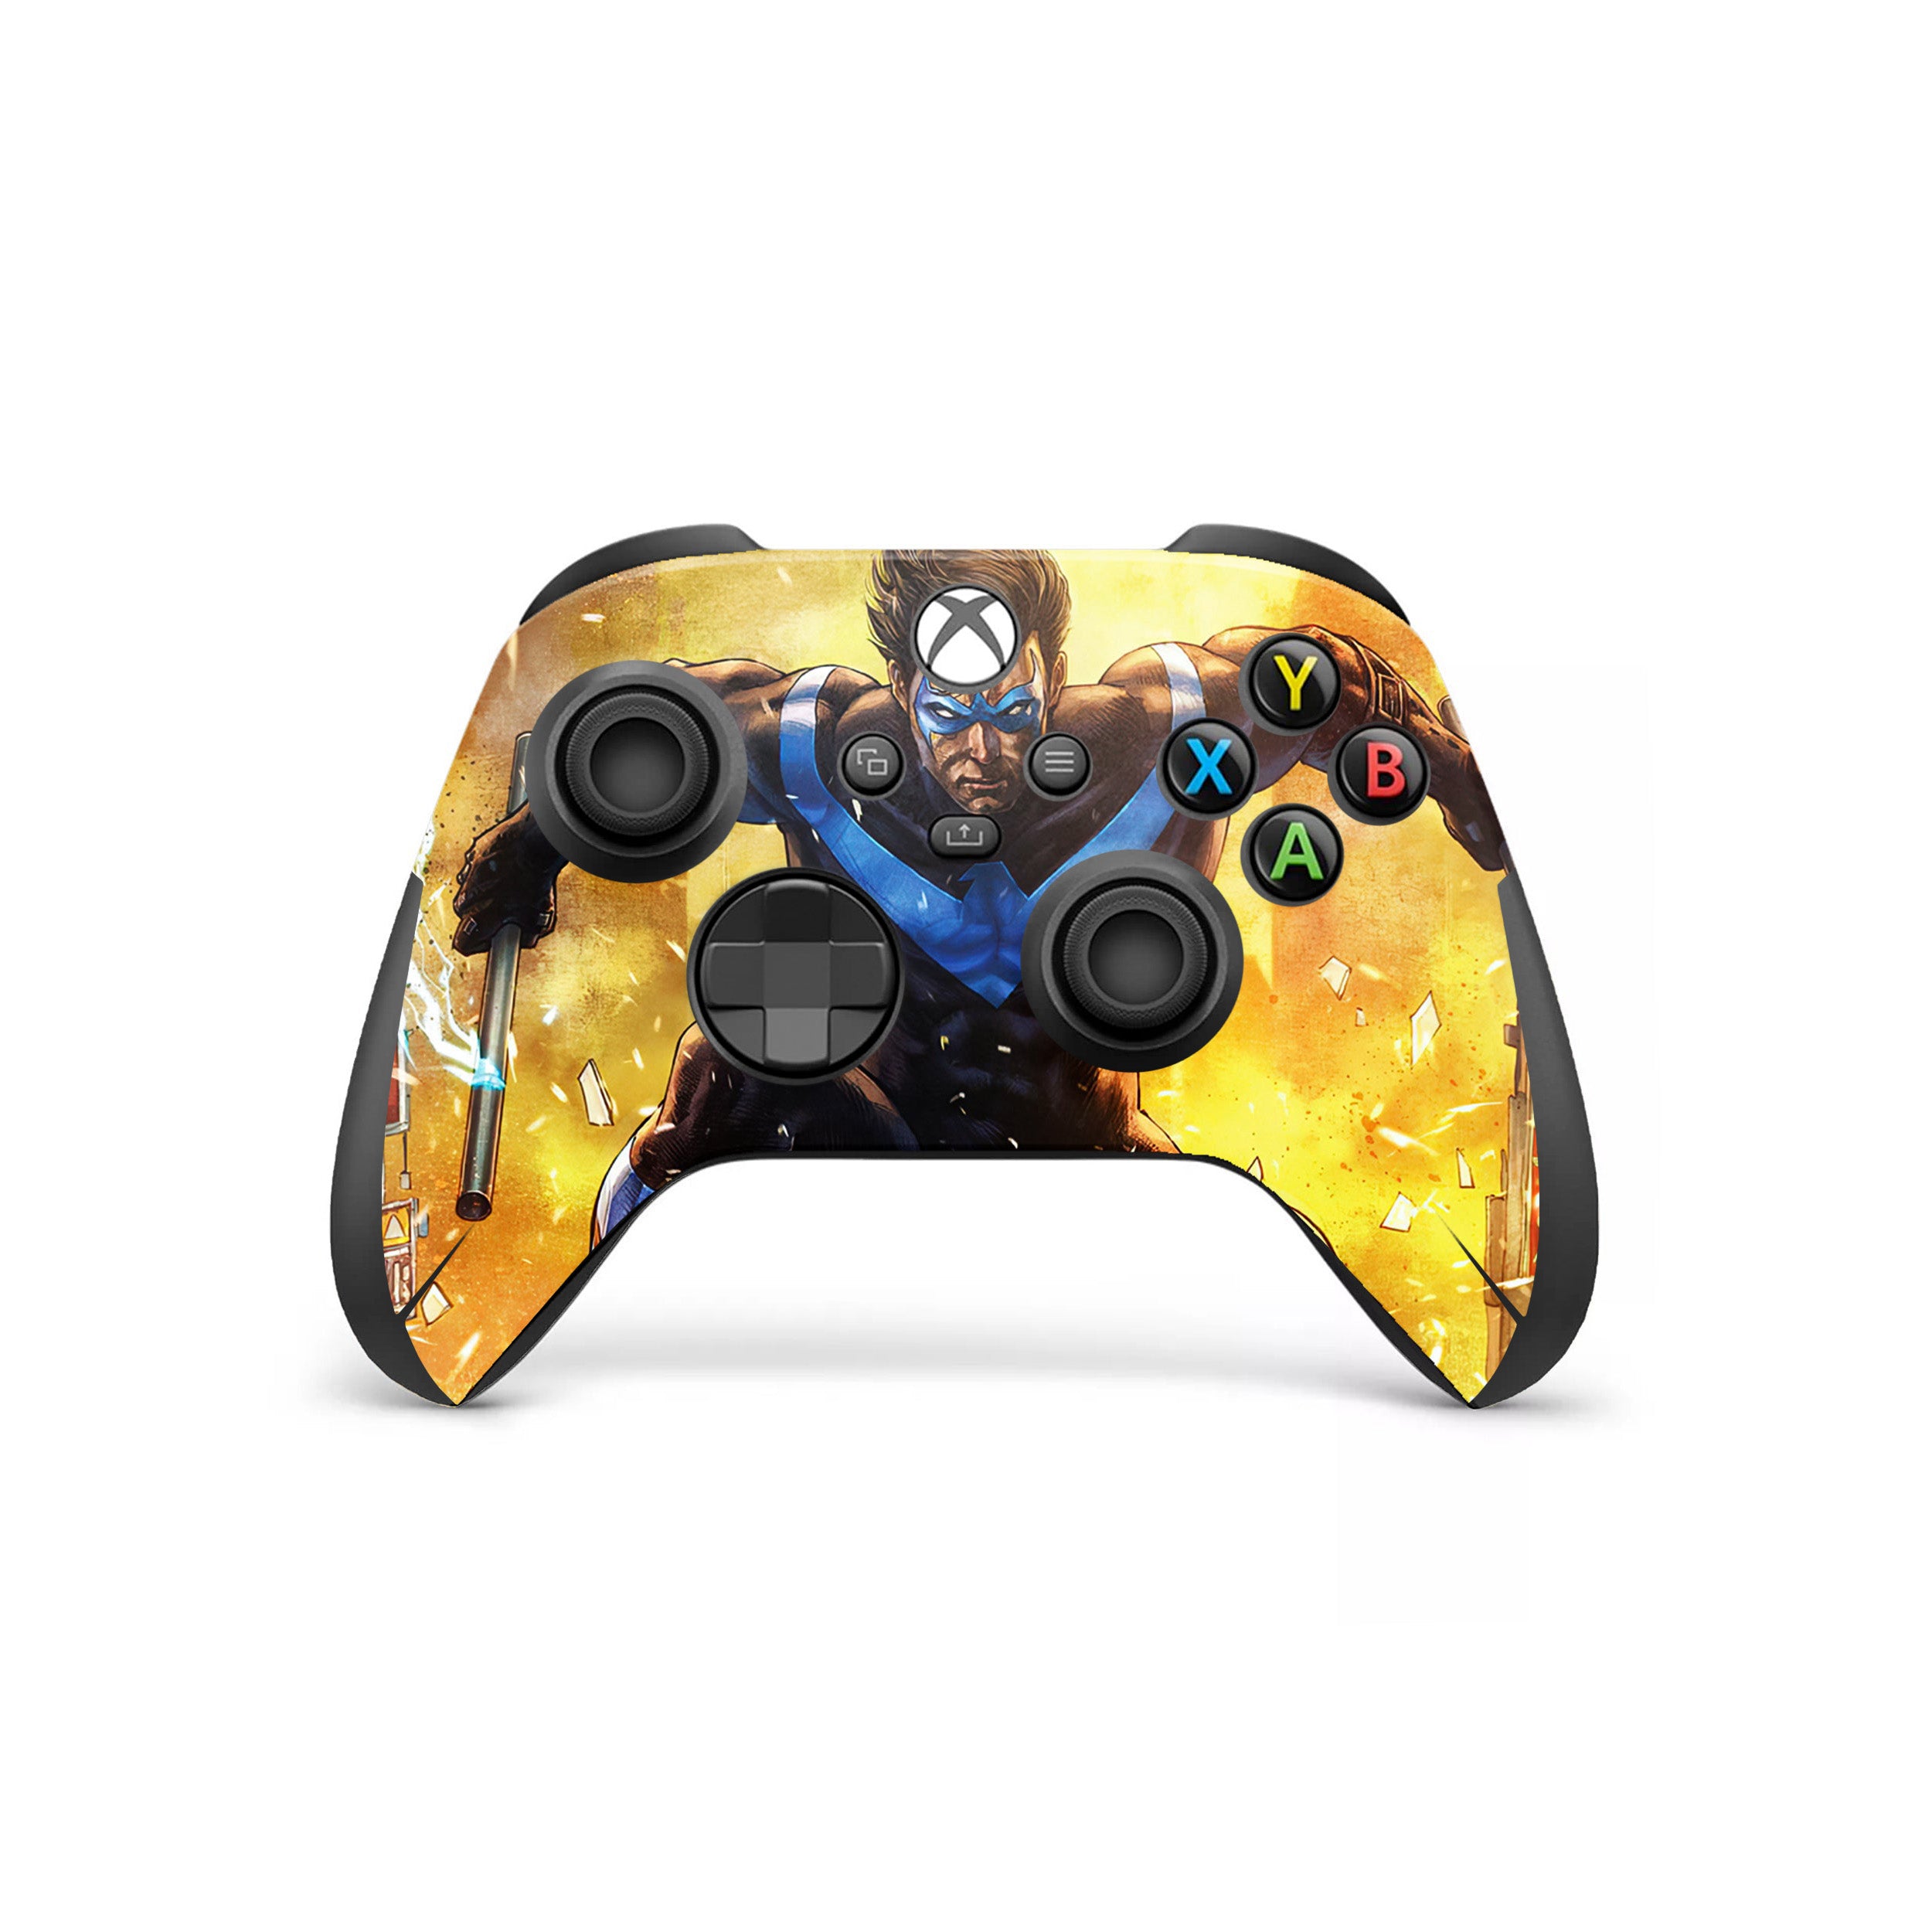 A video game skin featuring a DC Comics Nightwing design for the Xbox Wireless Controller.